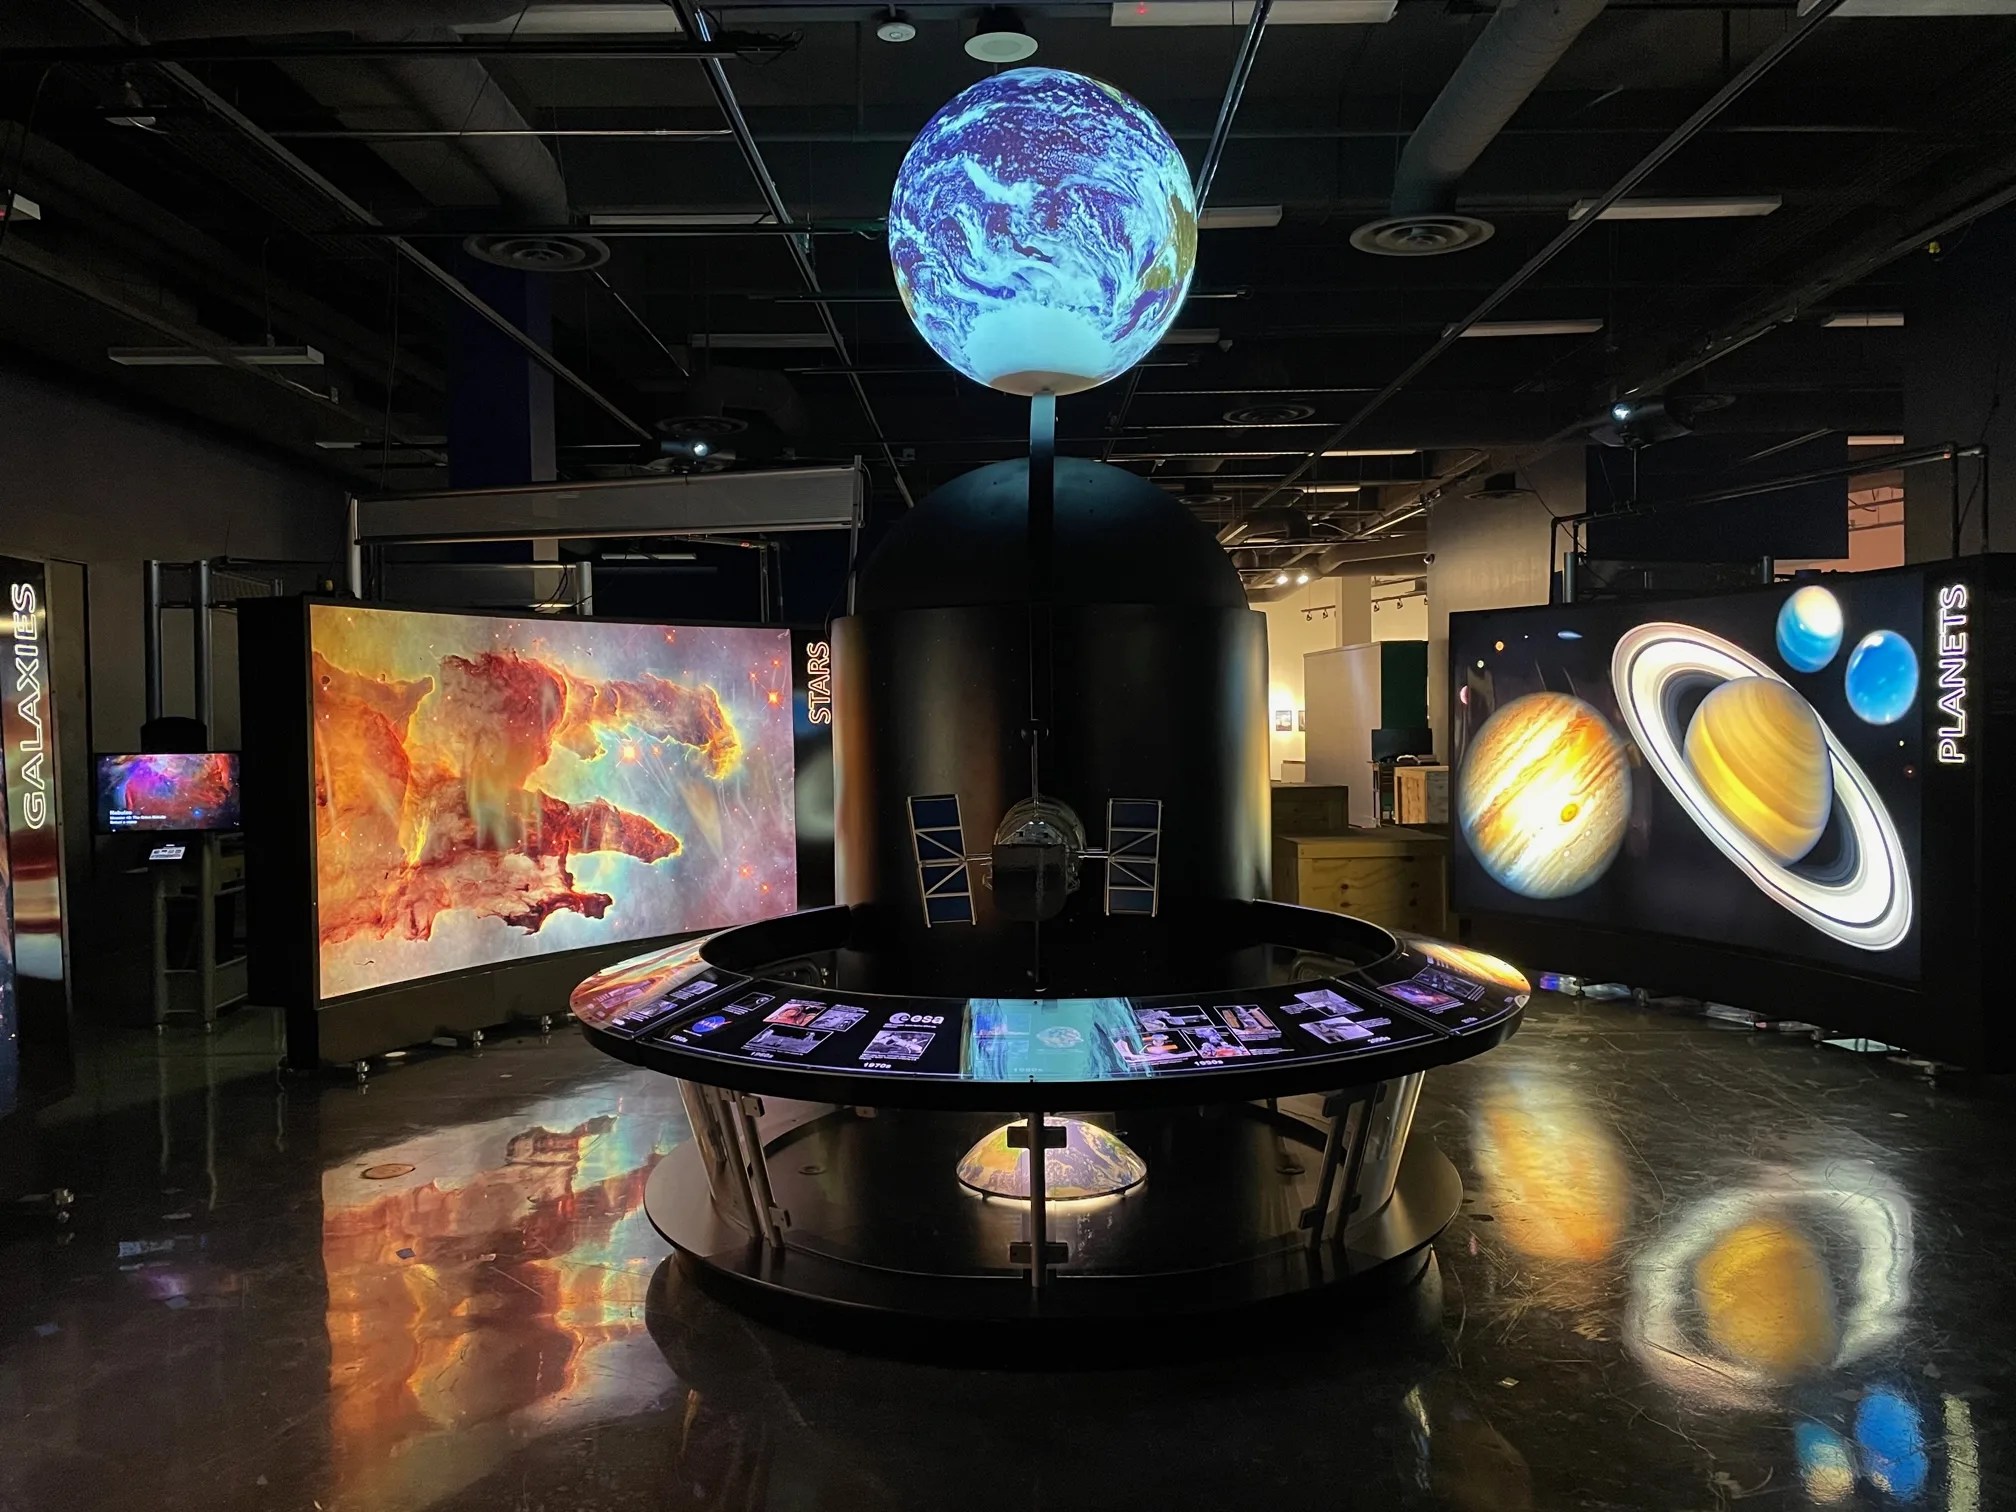 A 3-foot sphere is illuminatedabove the centerpiece station with the earth projected onto it.